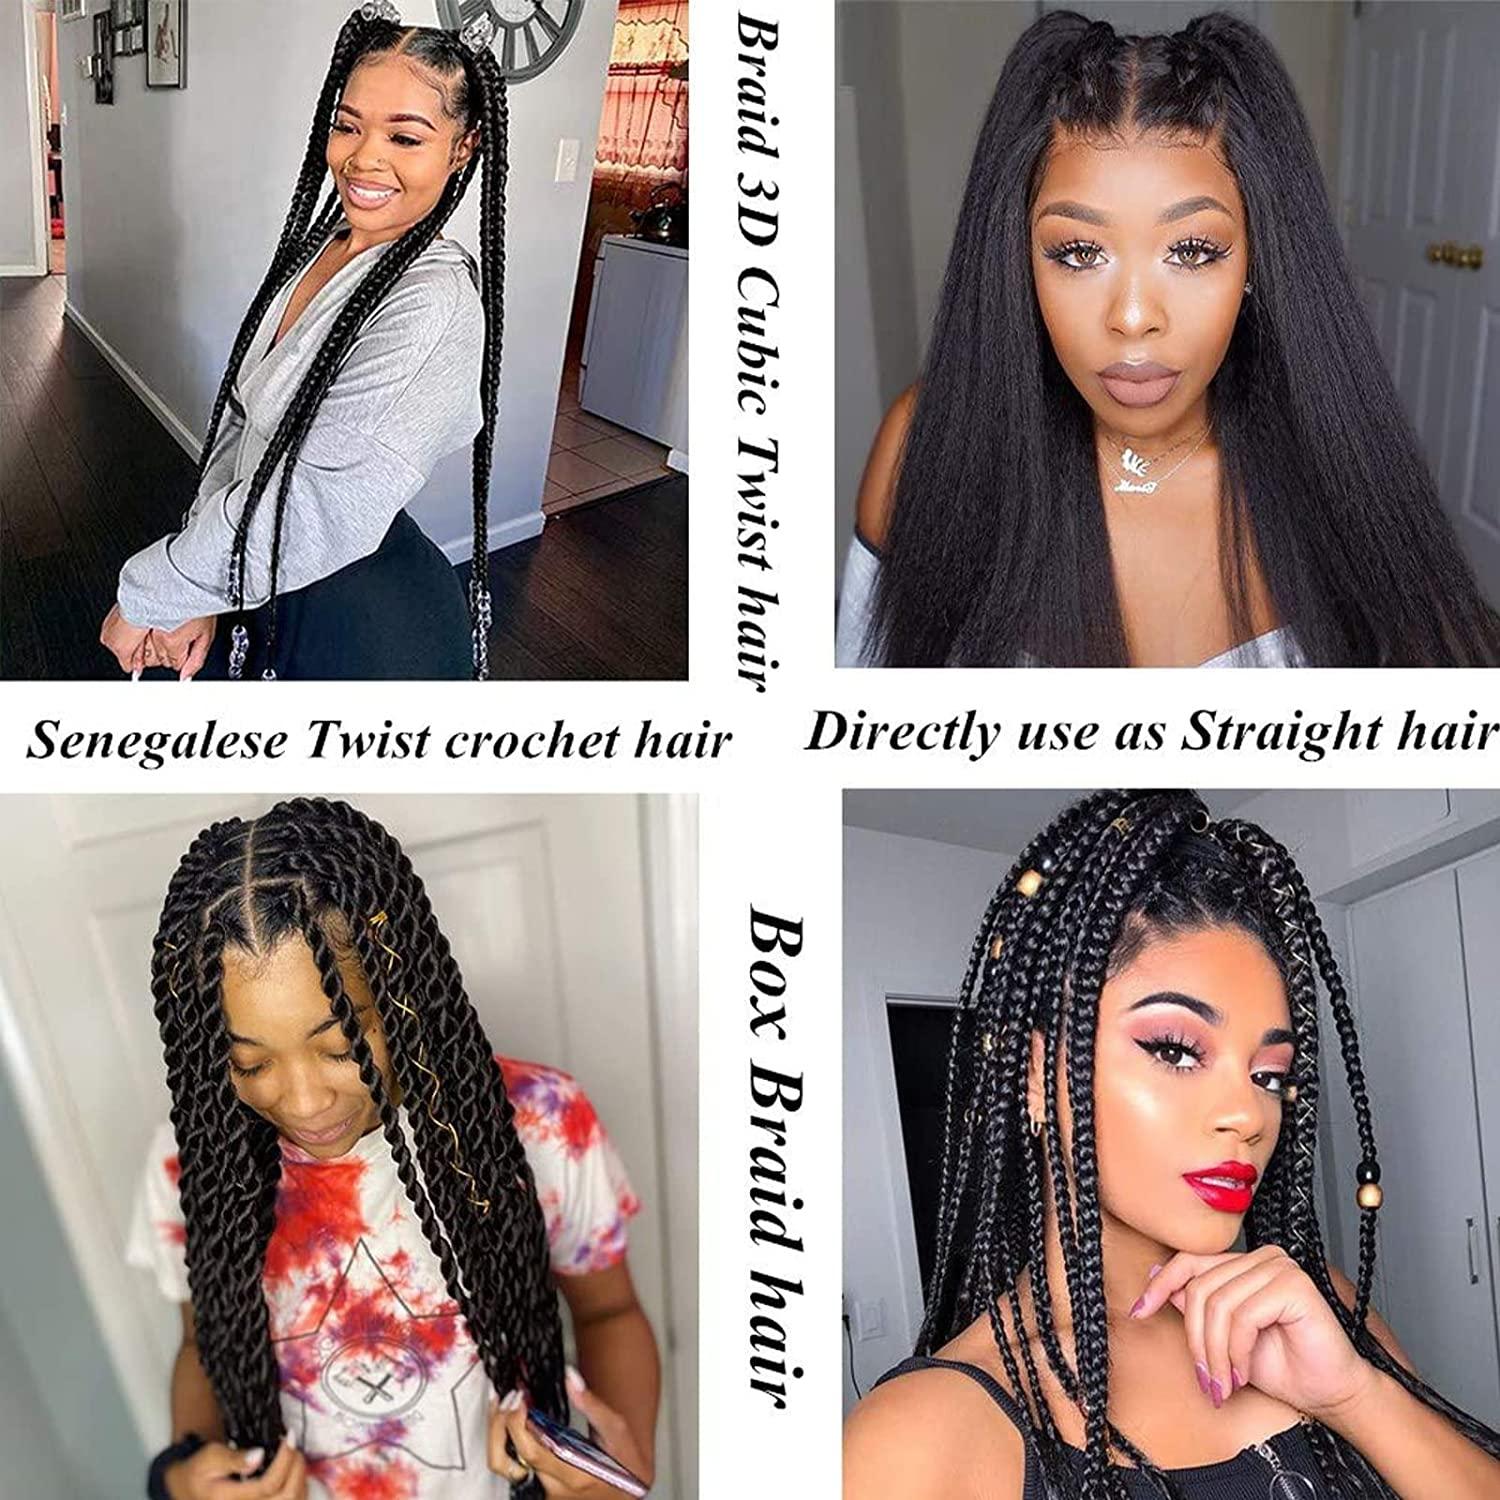 Black Braiding Hair 26 inch Pre Stretched Easy for Braiding Hair Yaki Texture Professional Braiding Hair Hot Water Setting Synthetic Hair Extension